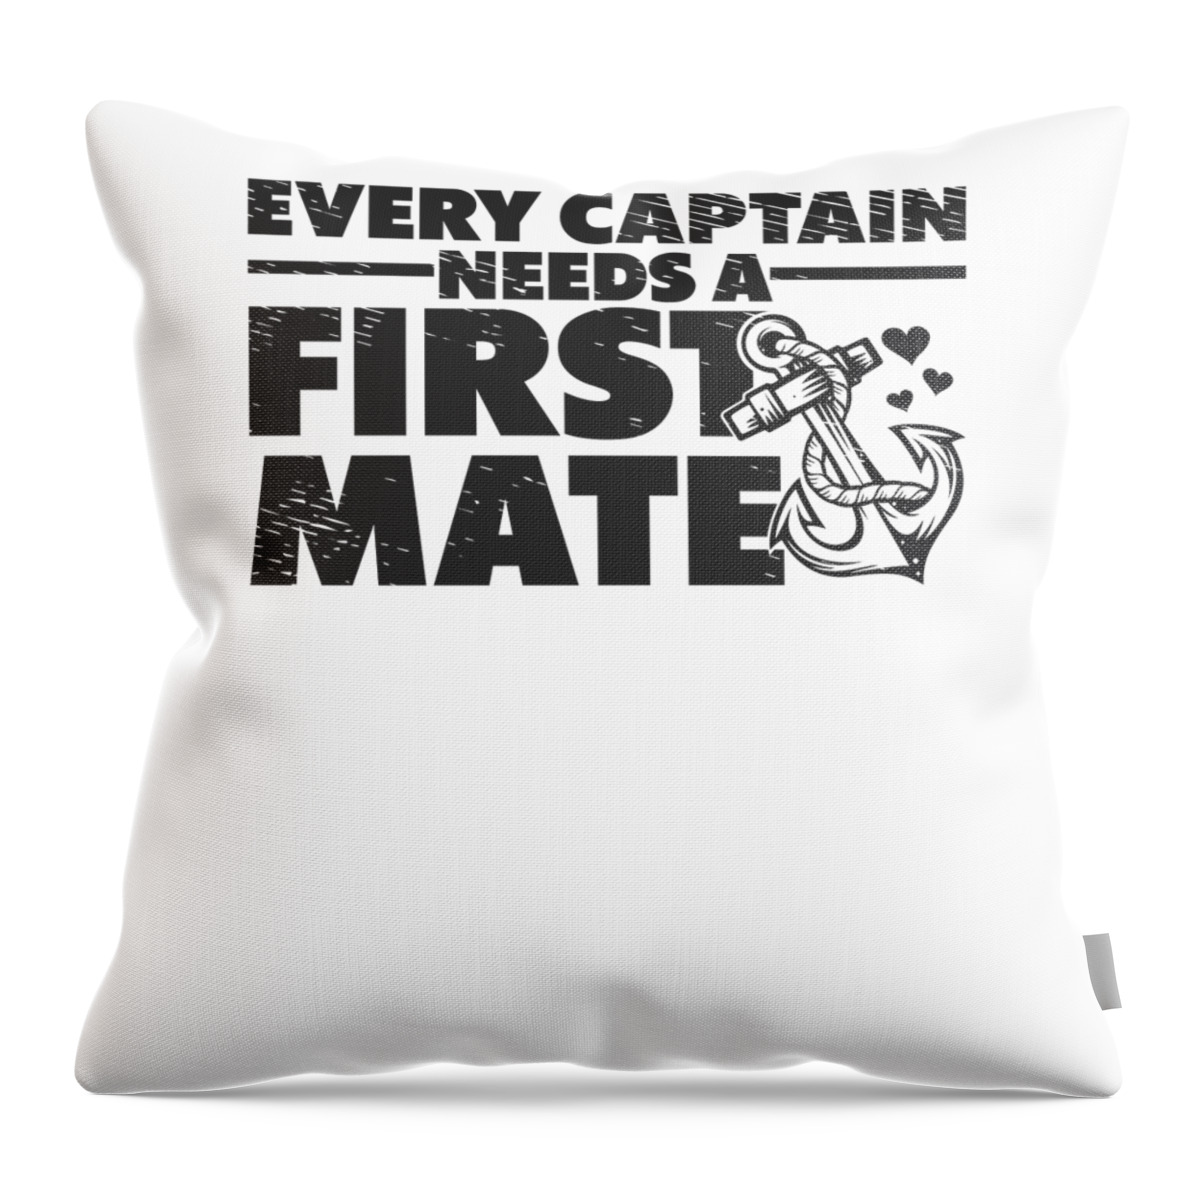 Boat Throw Pillow featuring the digital art Boat Owner Boating Sailing First Mate Captain Pontoon by Toms Tee Store